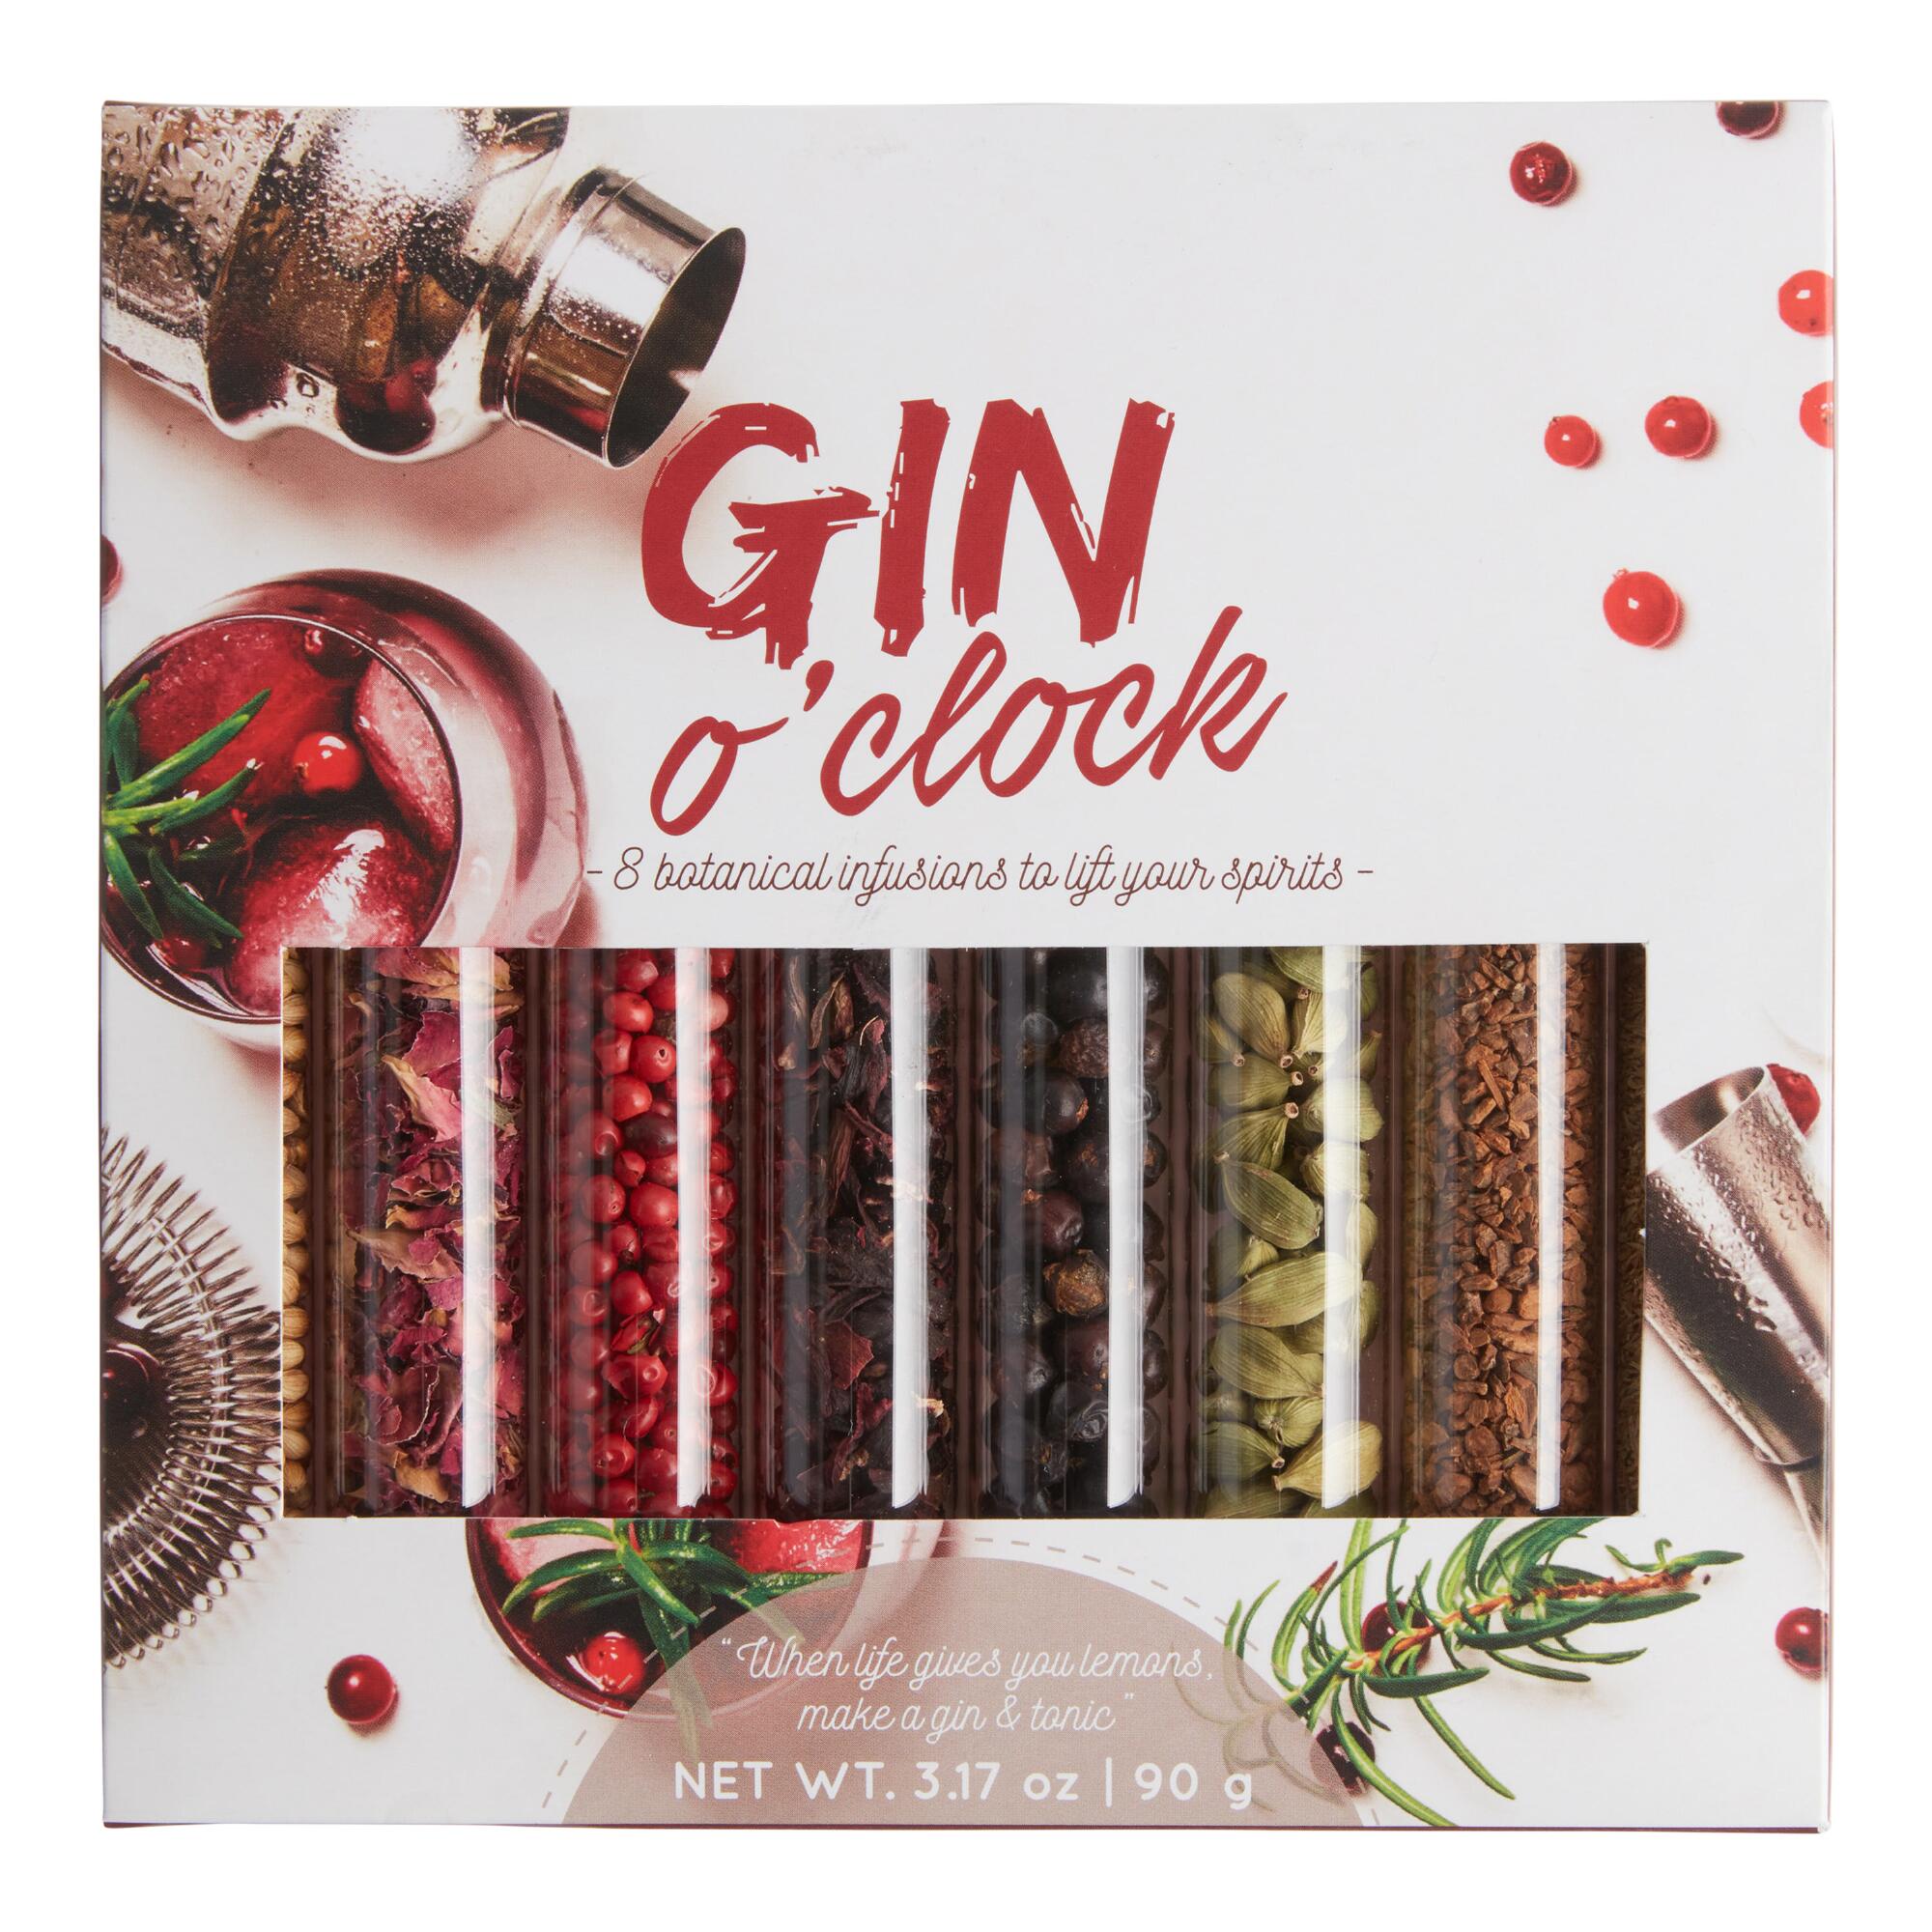 Gin O Clock Botanical Infusions Gift Set 8 Count by World Market